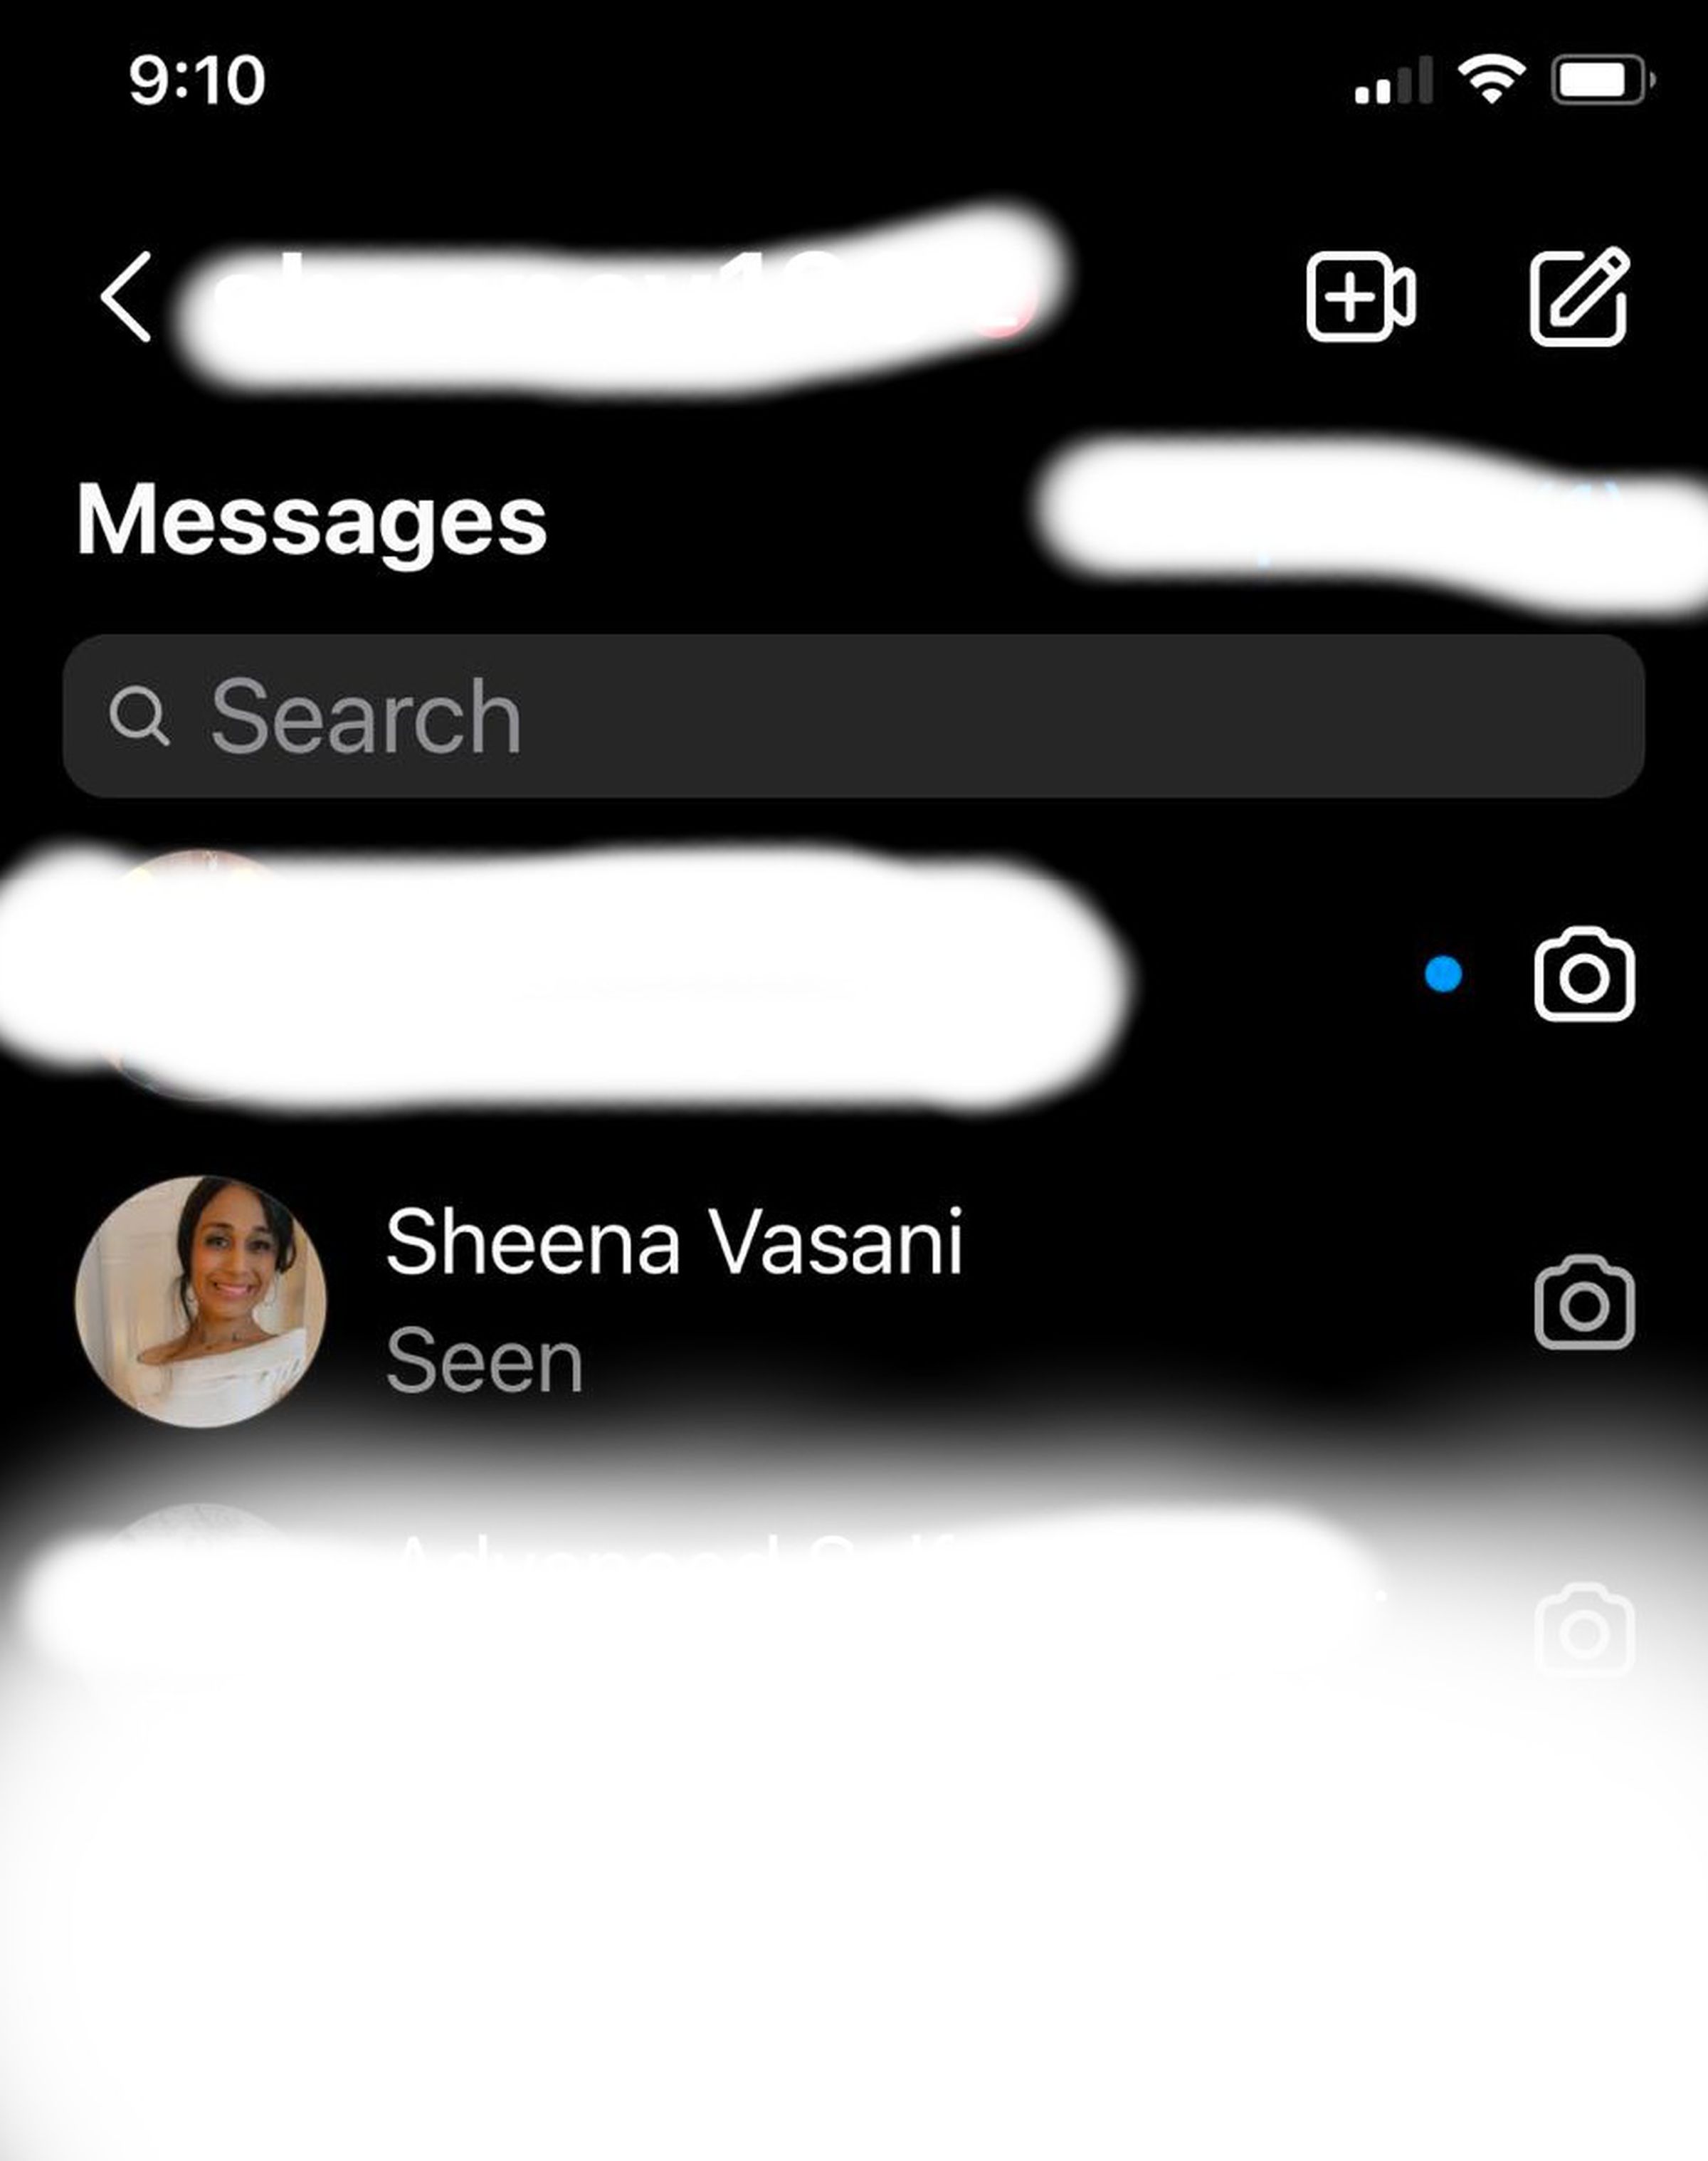 Message feed from Instagram (with messages whited out for privacy).